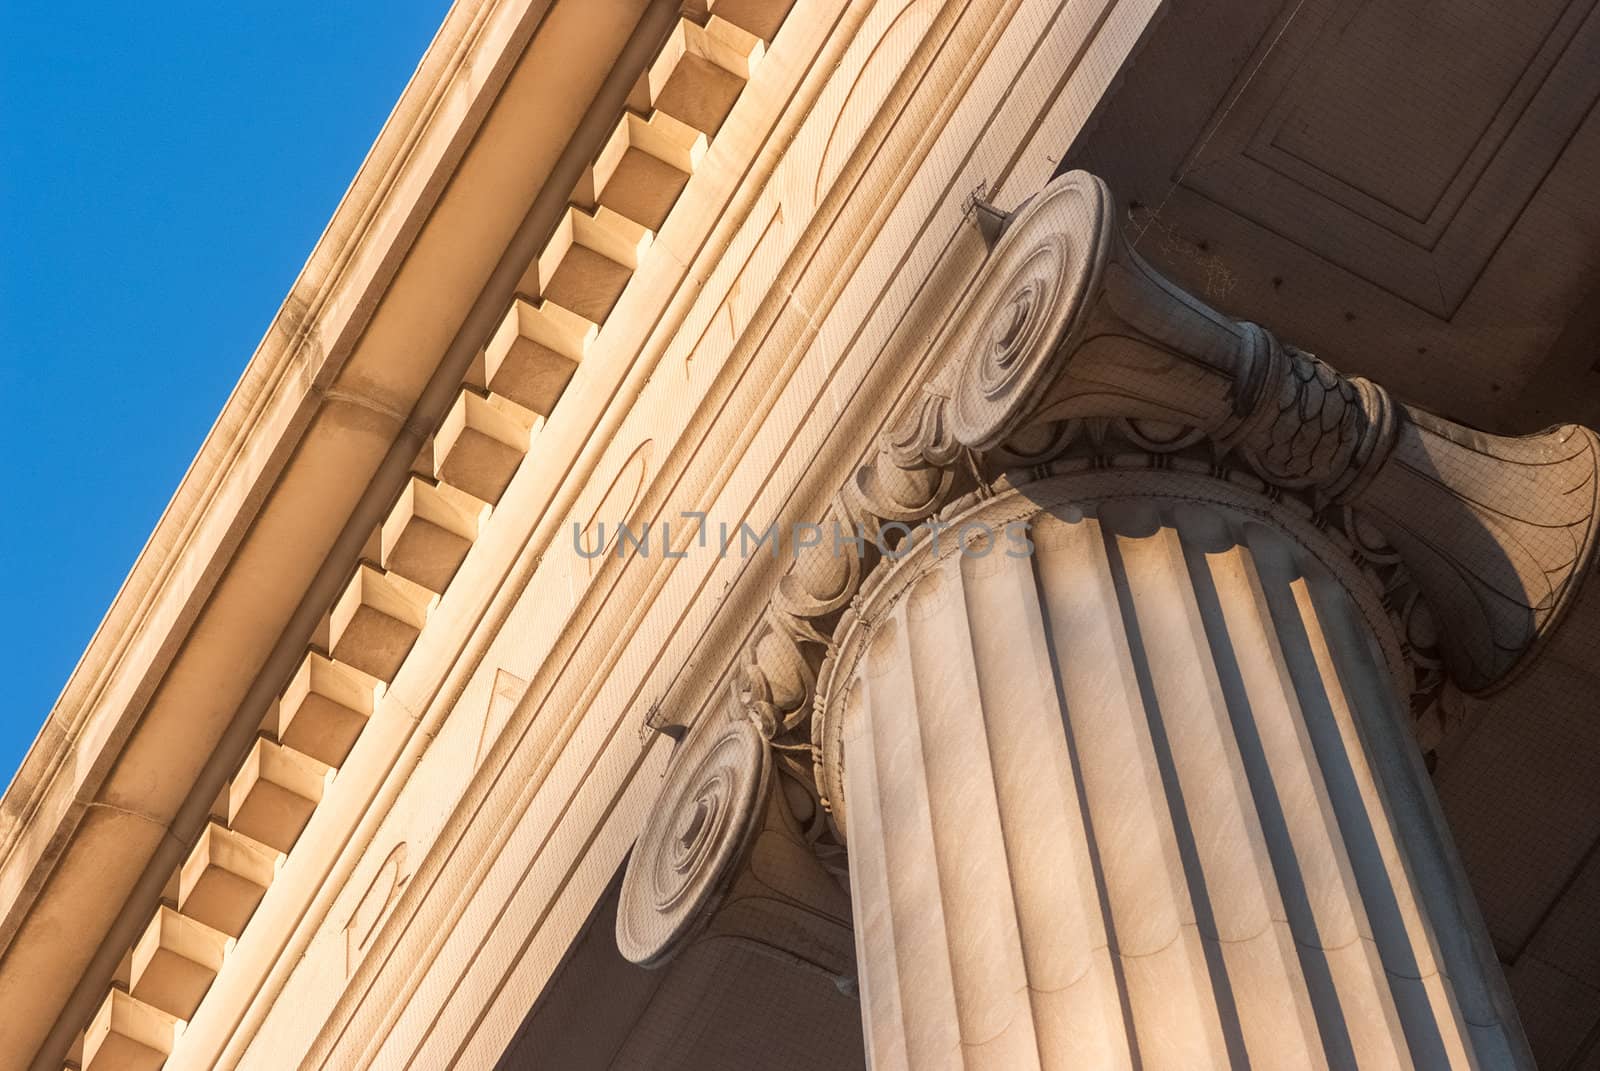 Ionic column top at sunset with blue sky